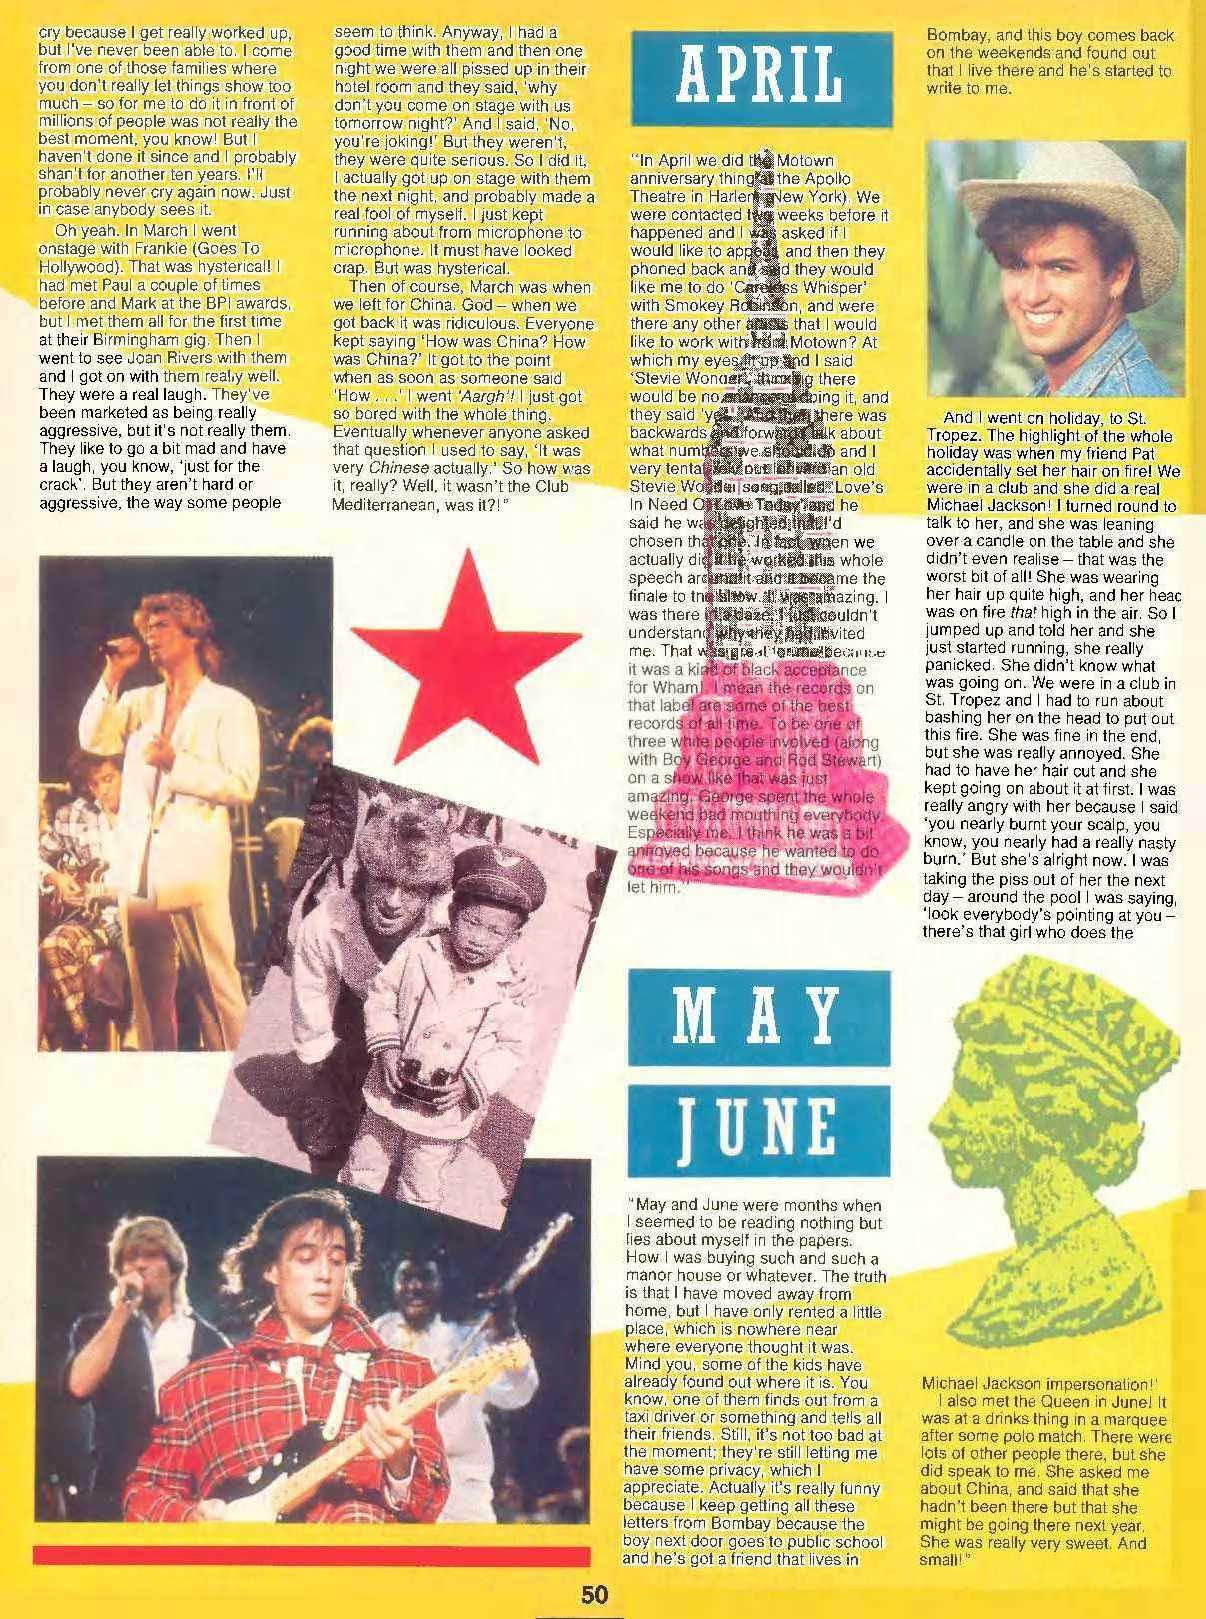 A Year in the Life of Wham! as Told by George Michael (Smash Hits Yearbook, 1986)